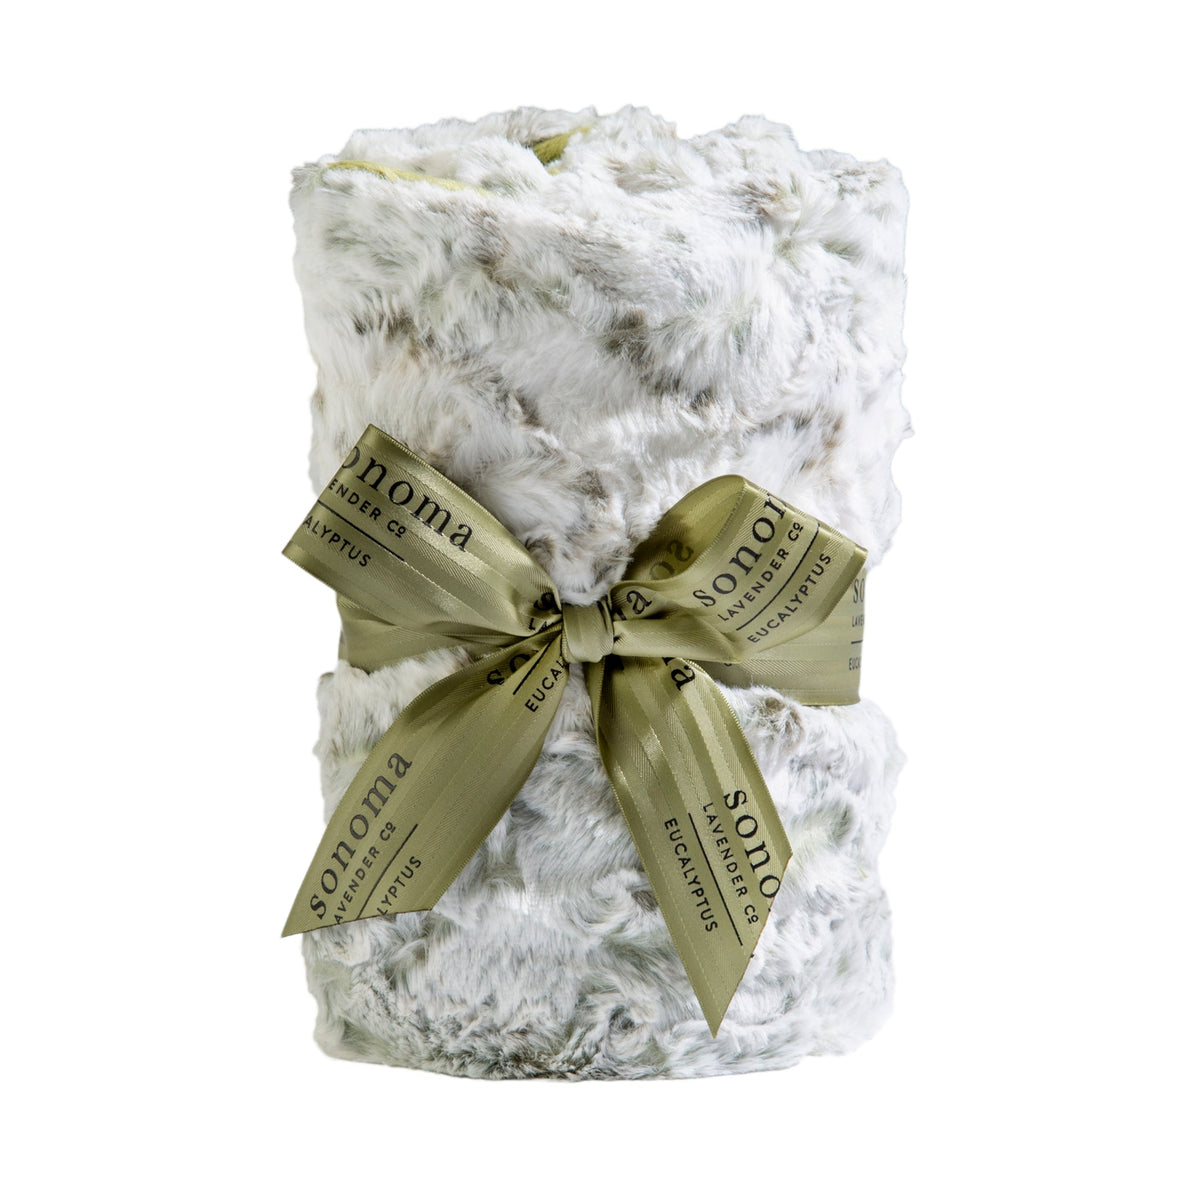 A soft, fluffy white blanket neatly rolled up and tied with two olive green ribbons, each printed with the word "Sonoma Lavender" in elegant script. The blanket has a plush, textured appearance and.